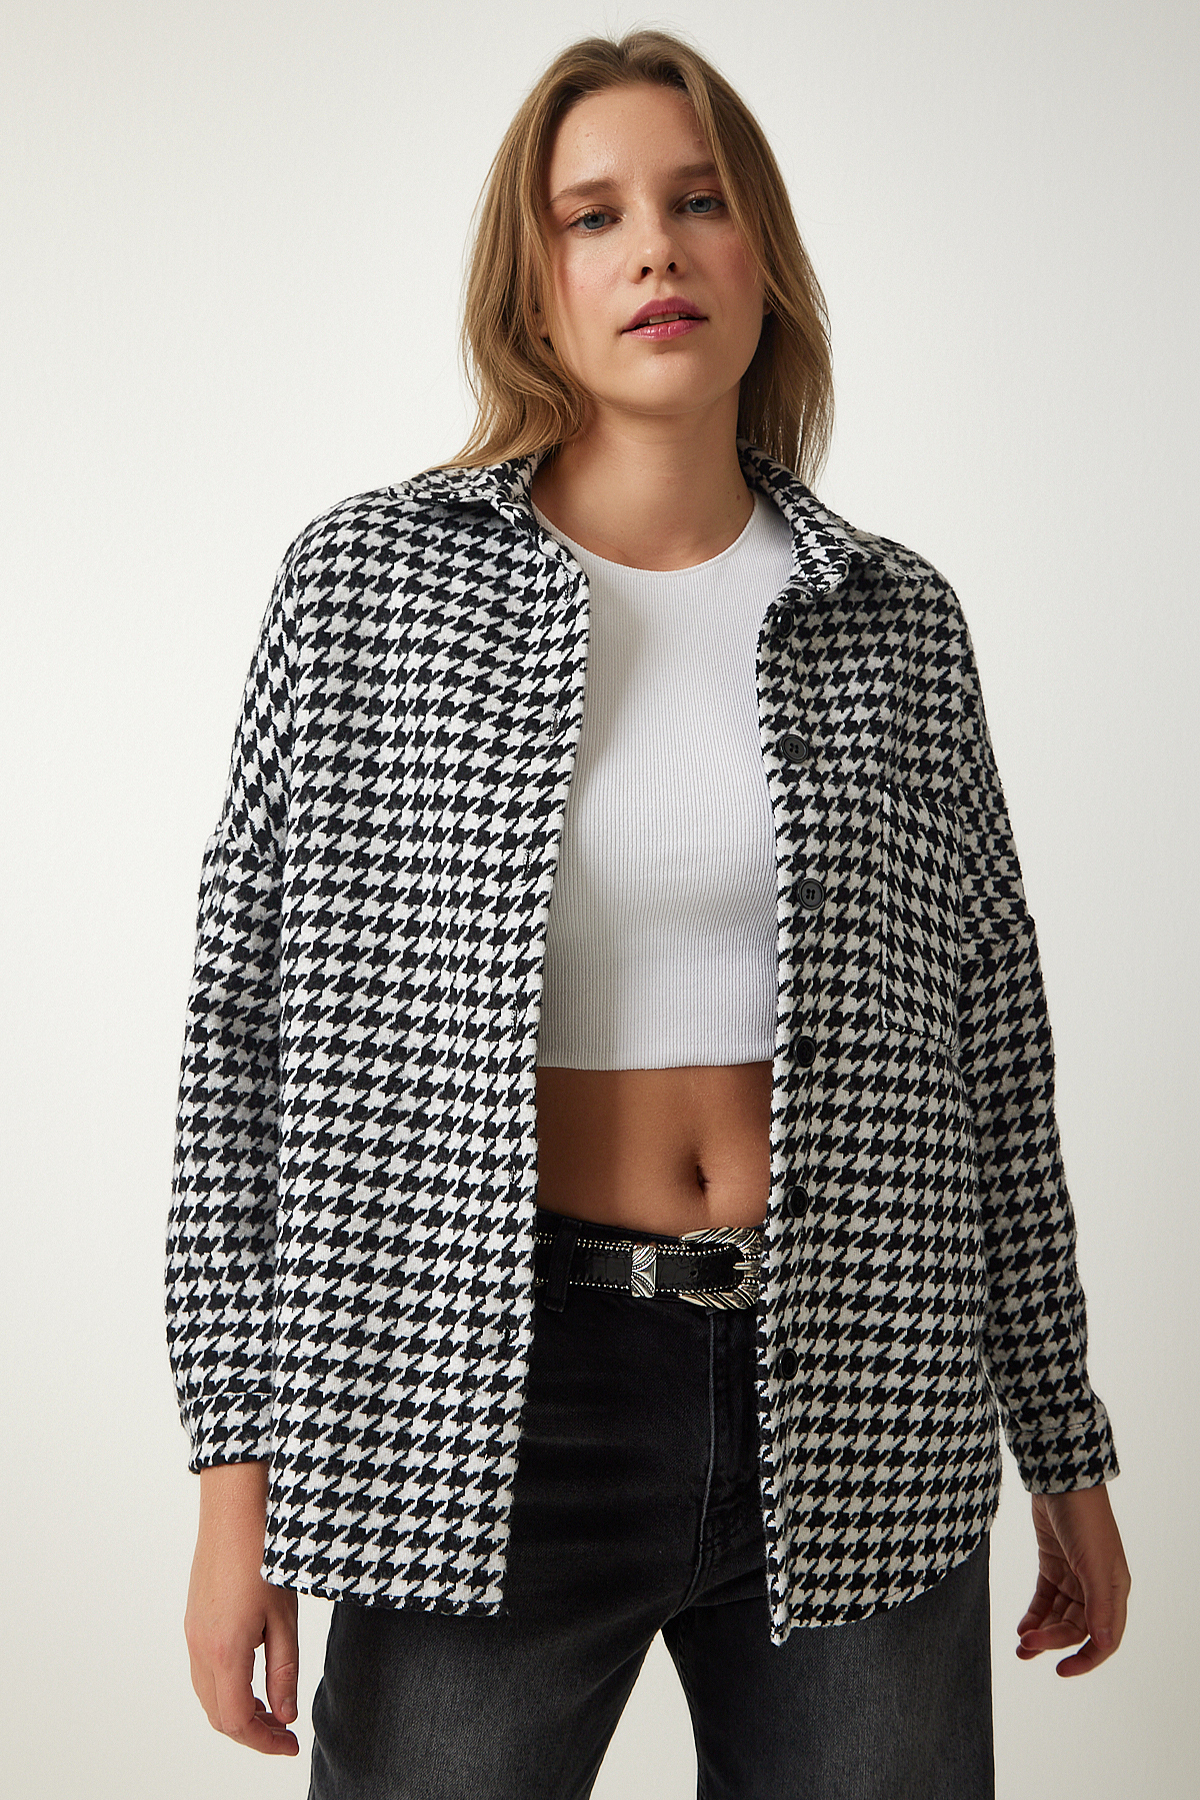 Happiness İstanbul Women's Black and White Houndstooth Patterned Stitch Jacket Shirt